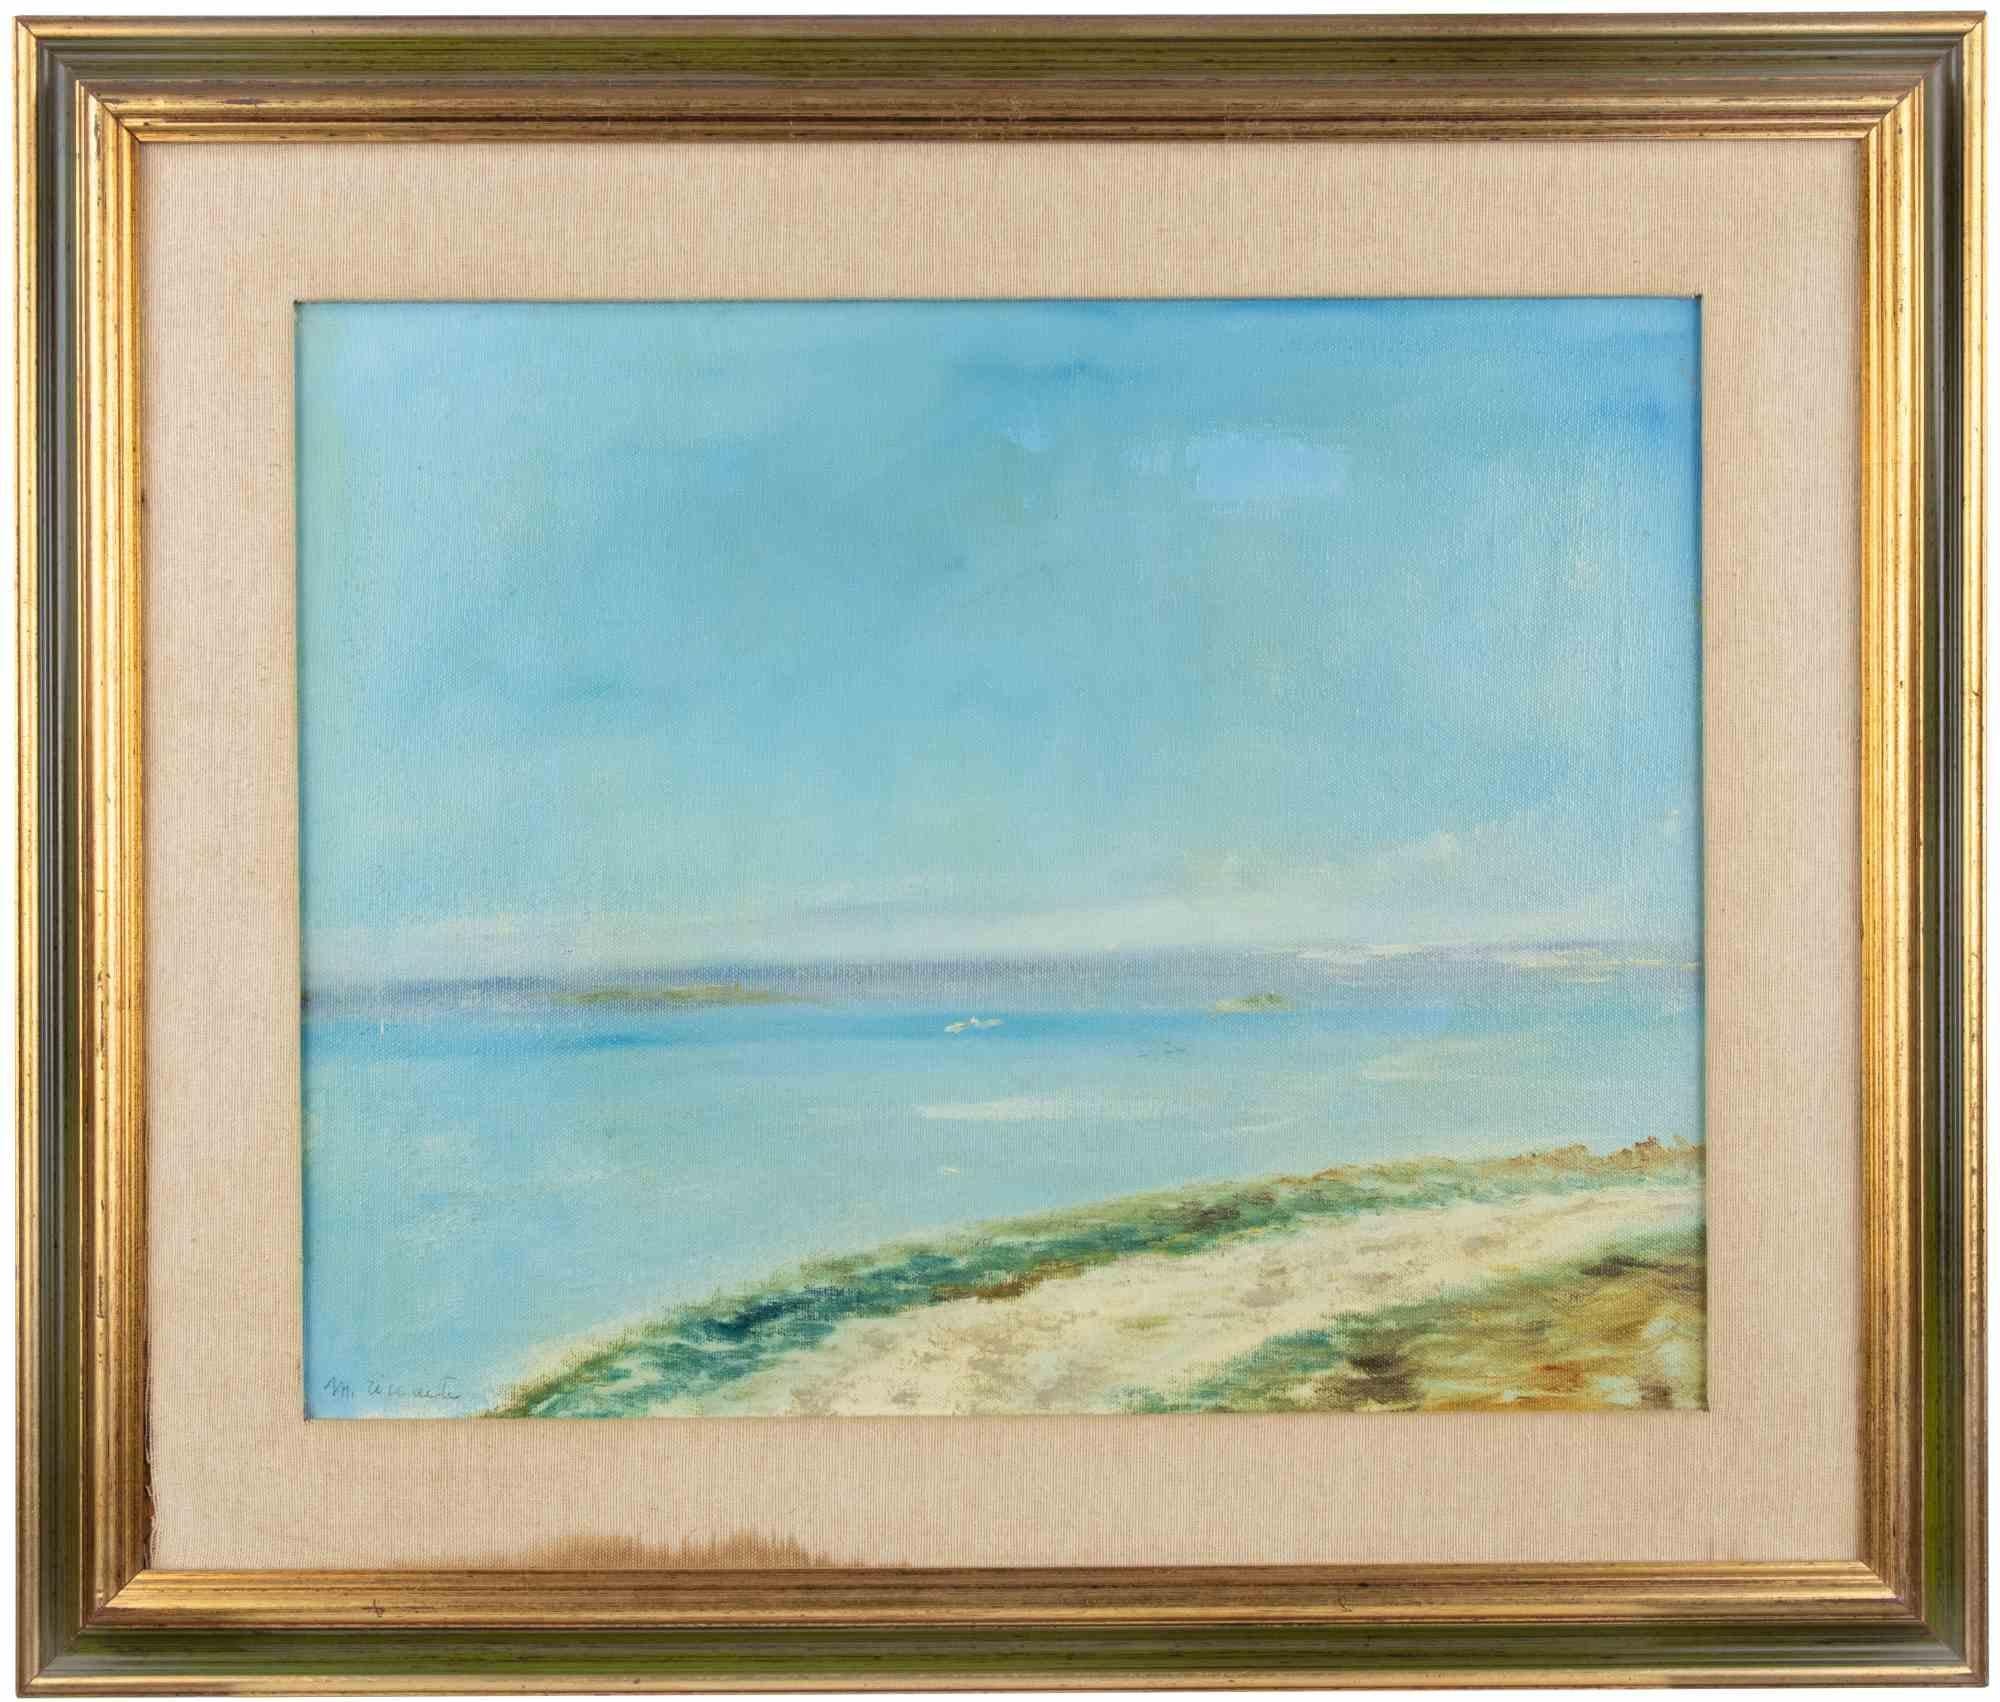 Seascape is a modern artwork realized by Michele Ricciuti in 1980.

Mixed colored oil painting on canvas.

Hand signed on the lower margin.

Signature and date on the back.